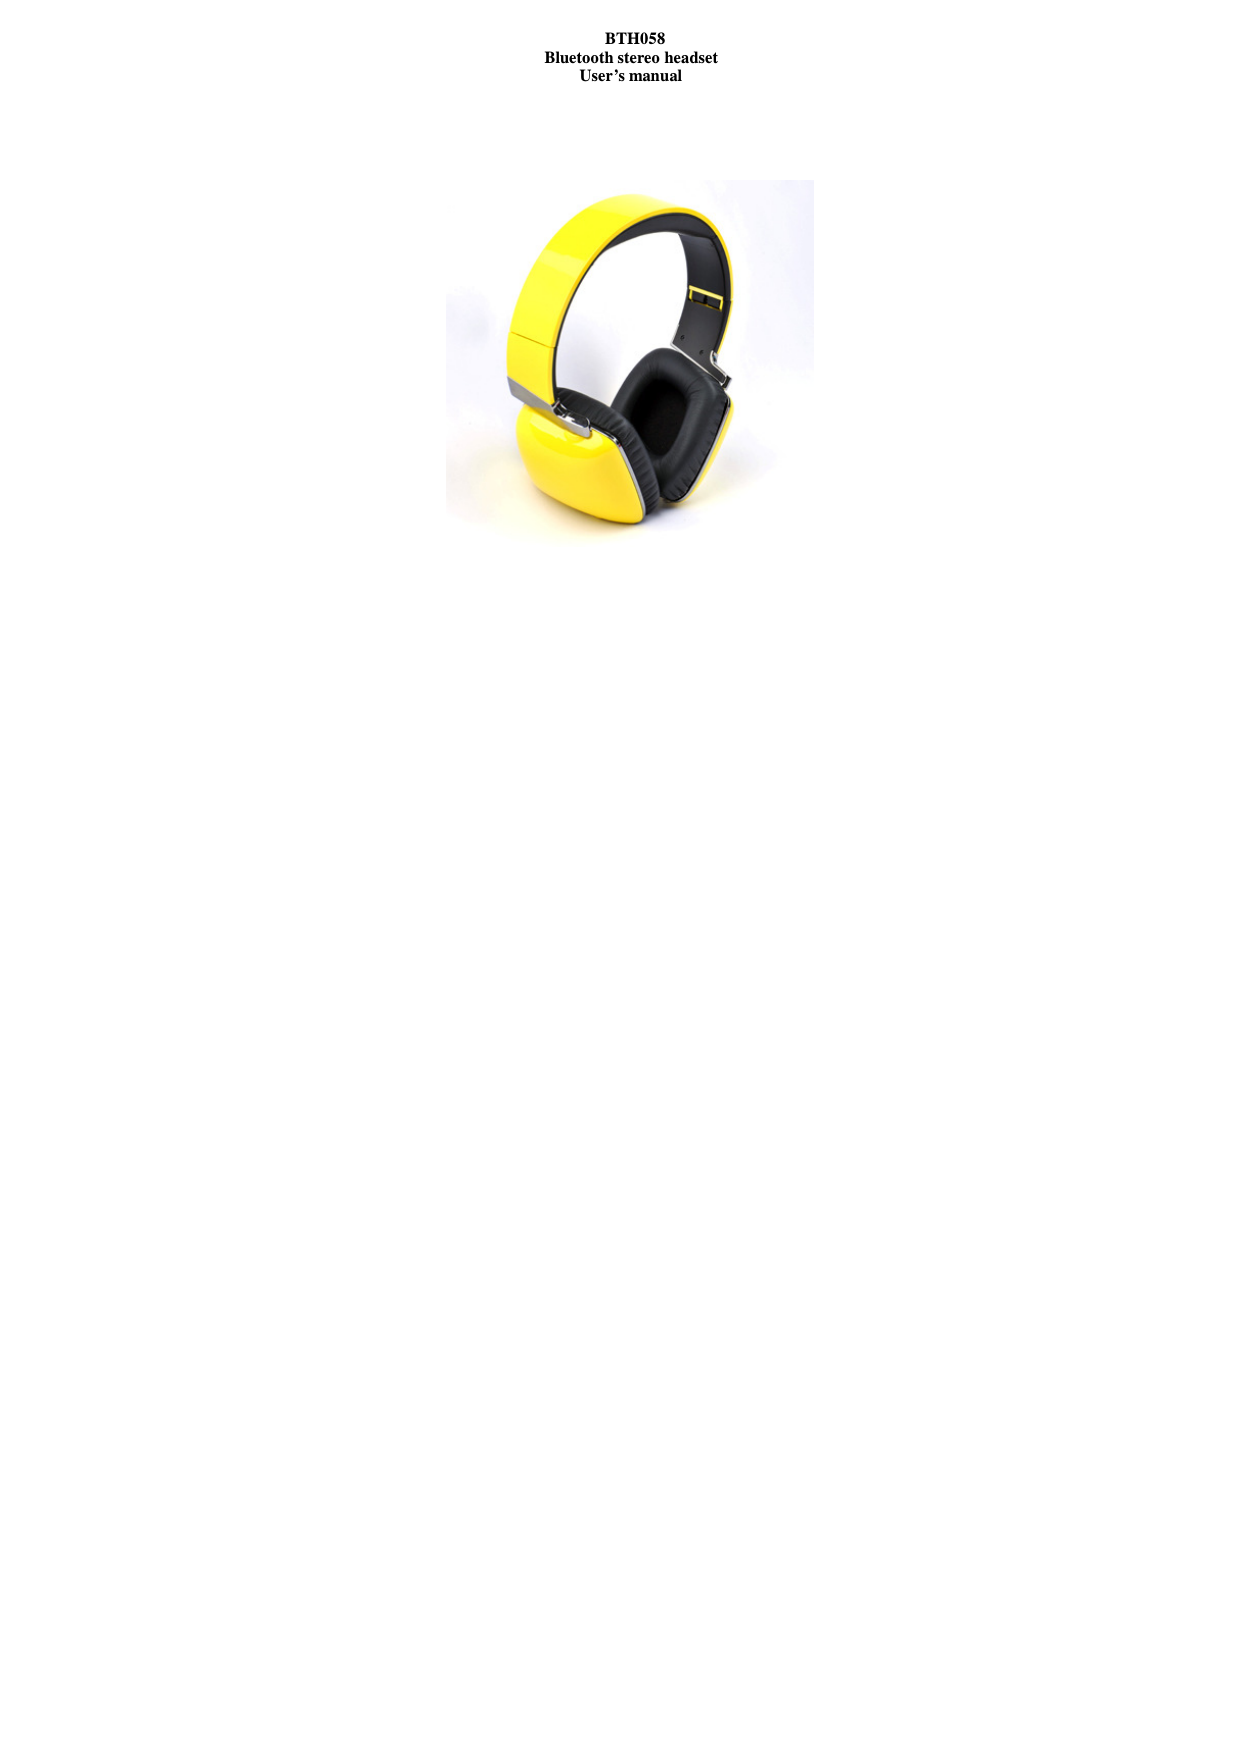   BTH058 Bluetooth stereo headset User’s manual                                